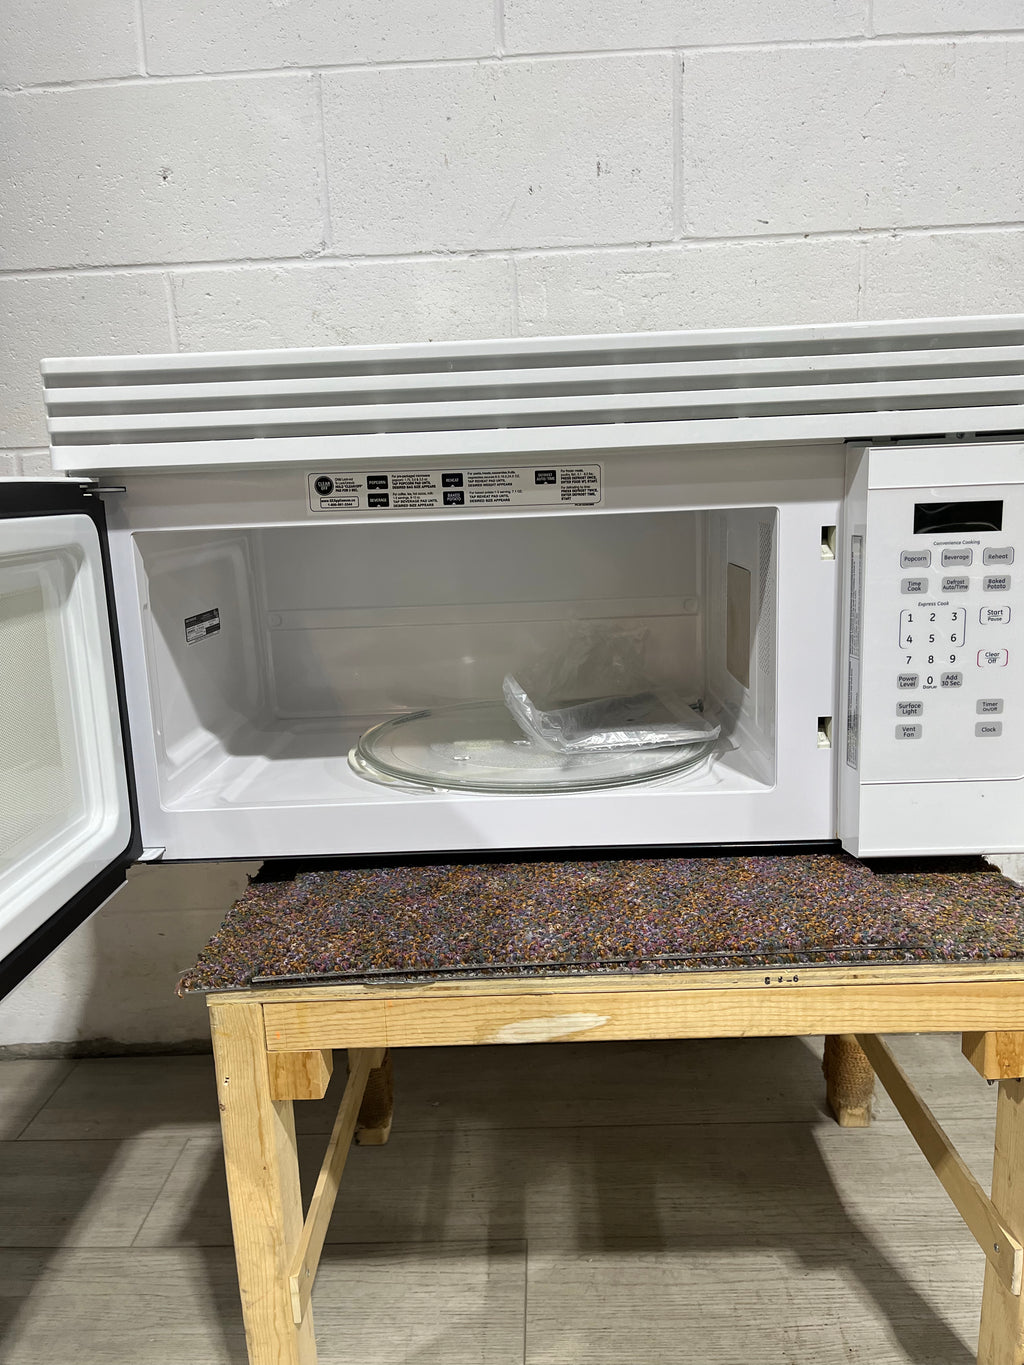 General Electric Over the Range Microwave Oven